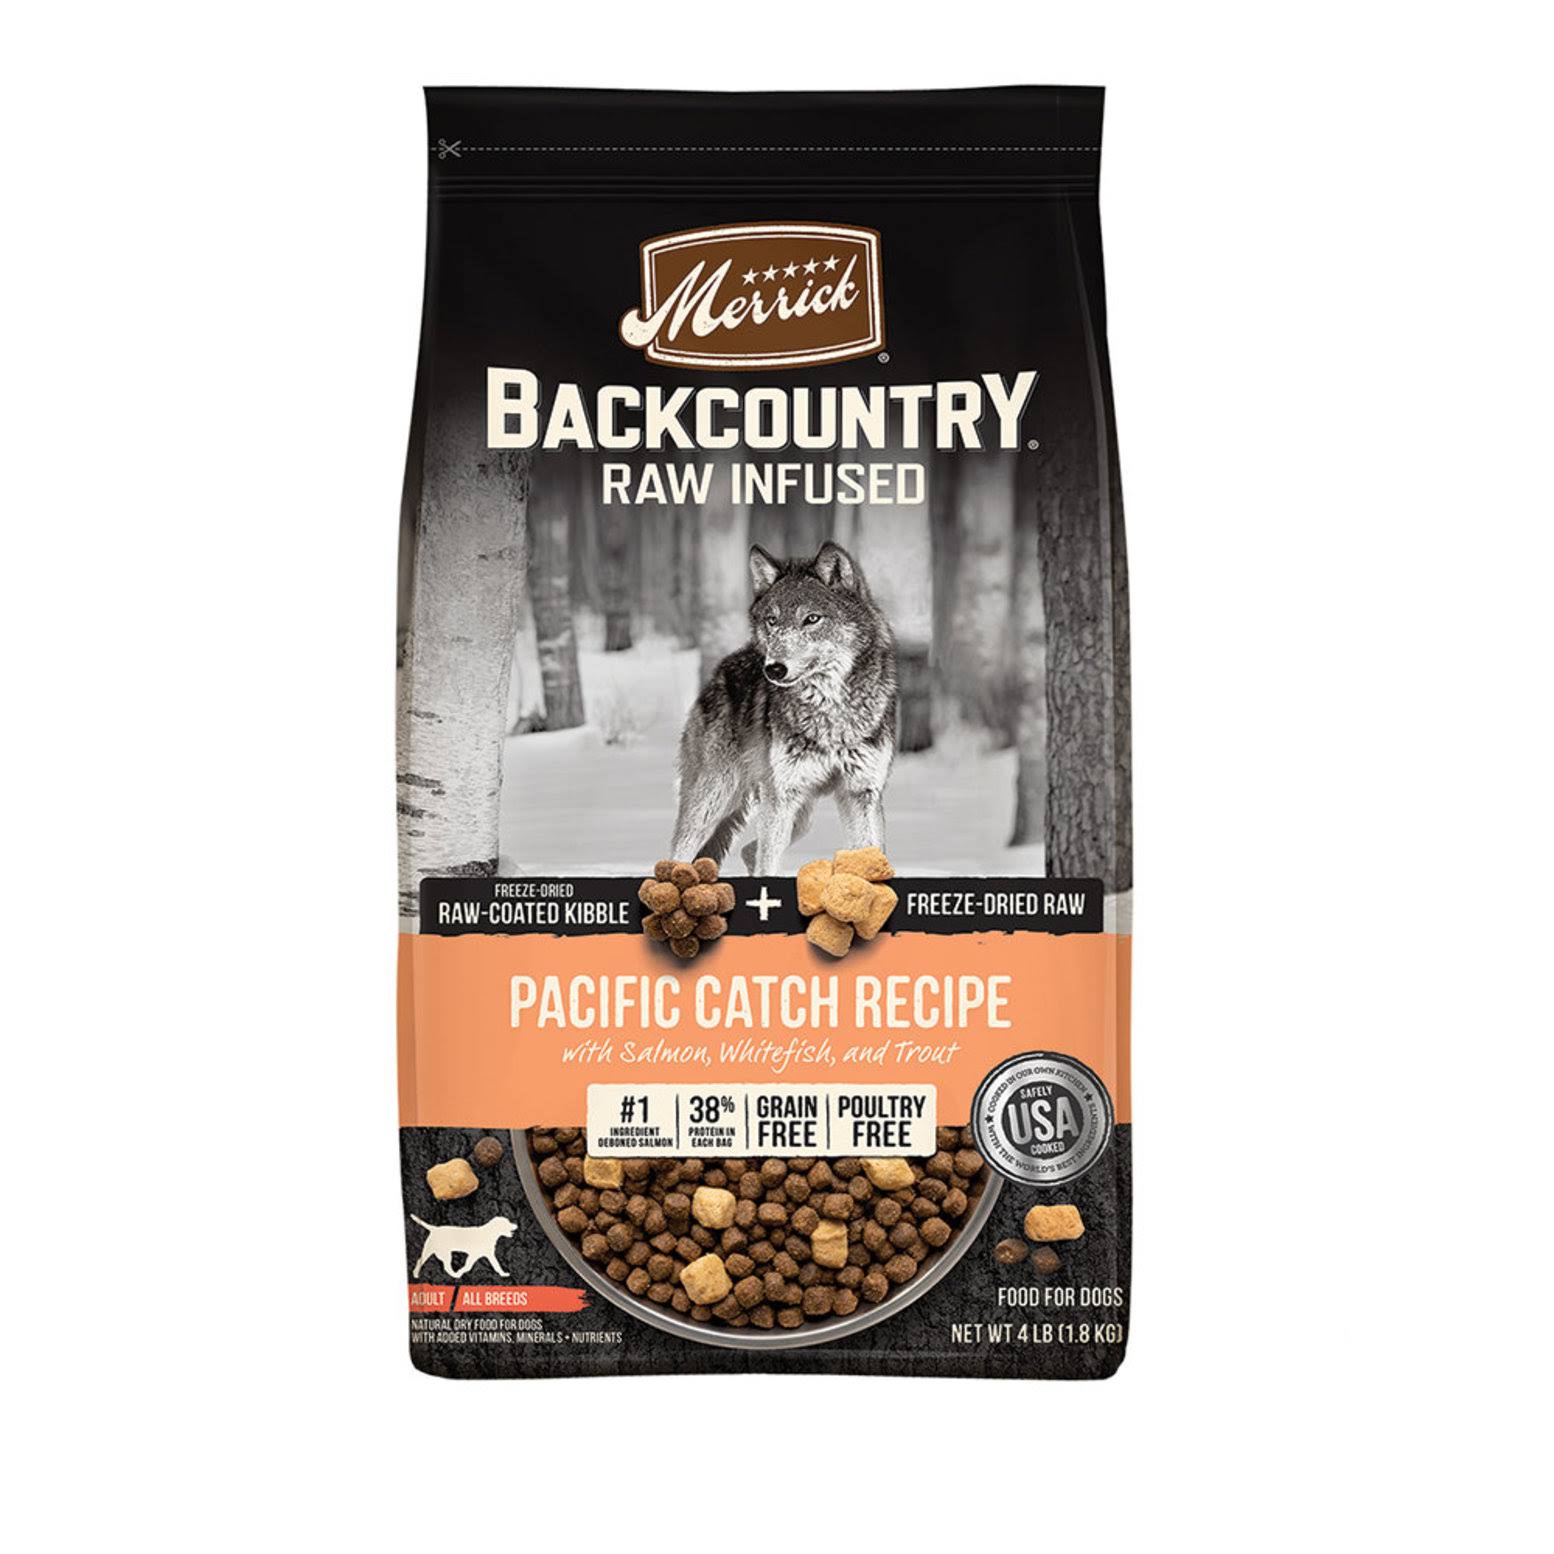 Merrick Grain Free Backcountry Raw Infused Pacific Catch | Dog Food | Size: 1.81 kg